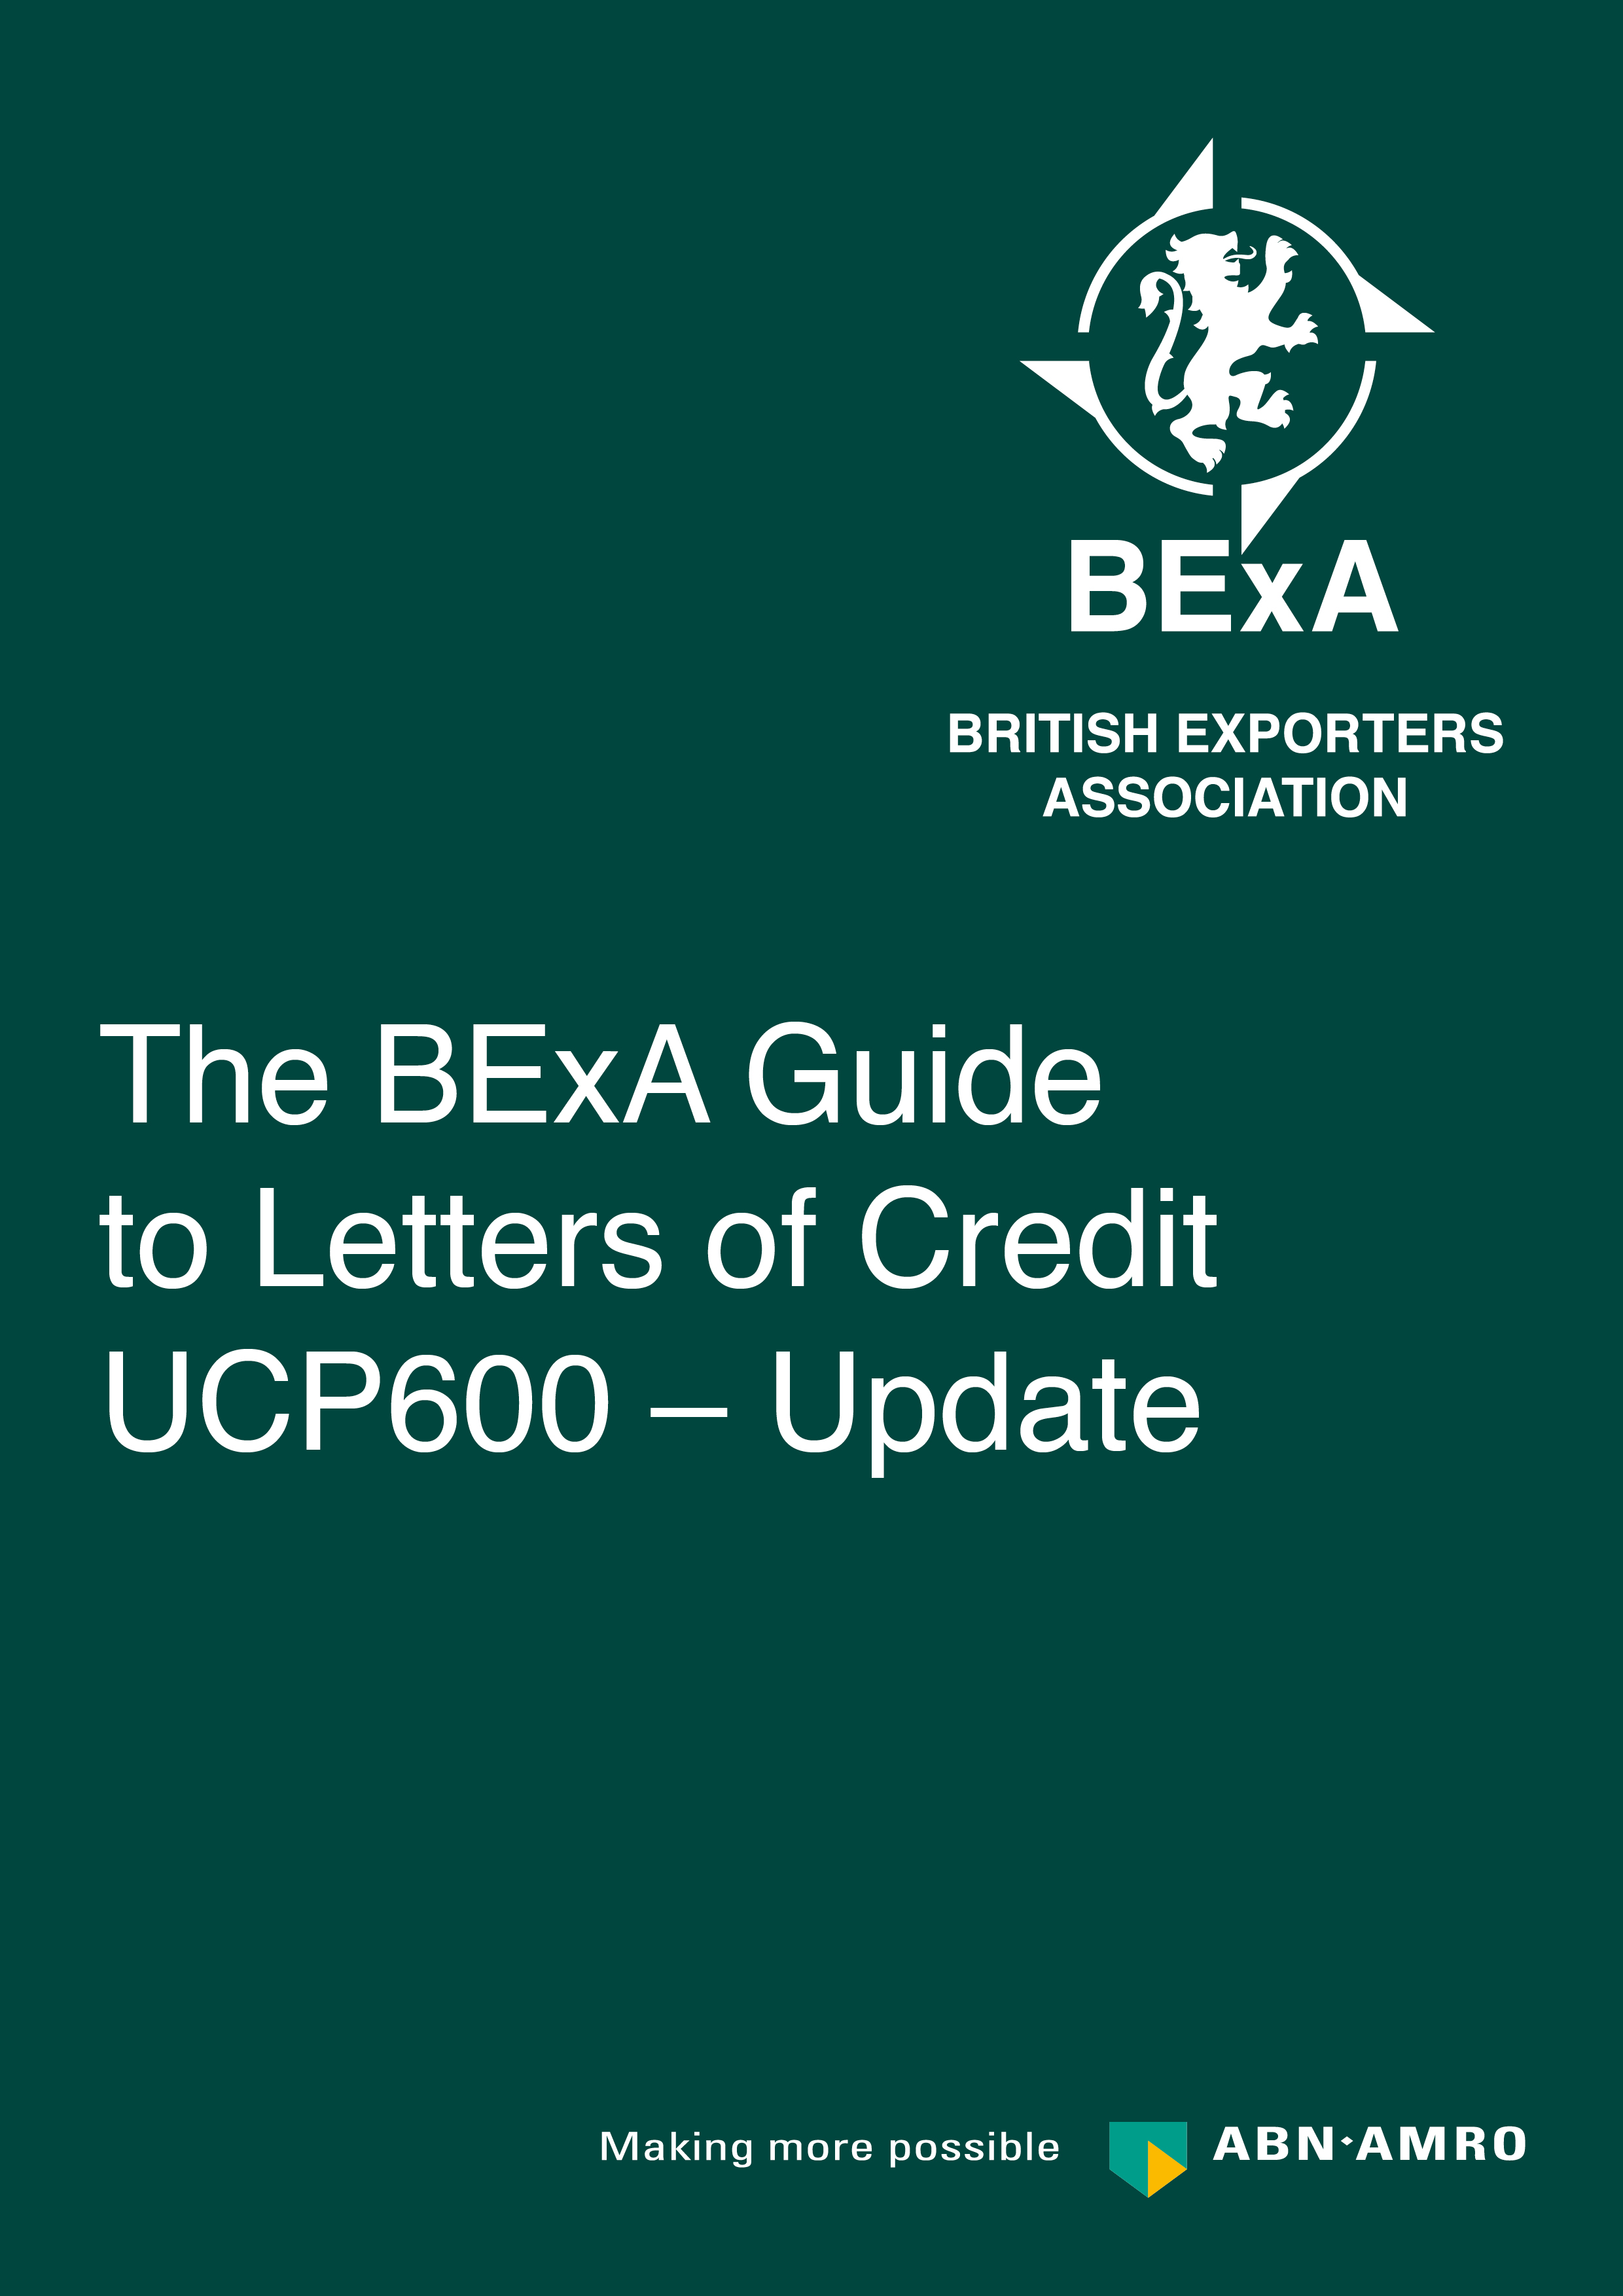 BExA Guide to Letters of Credit front cover